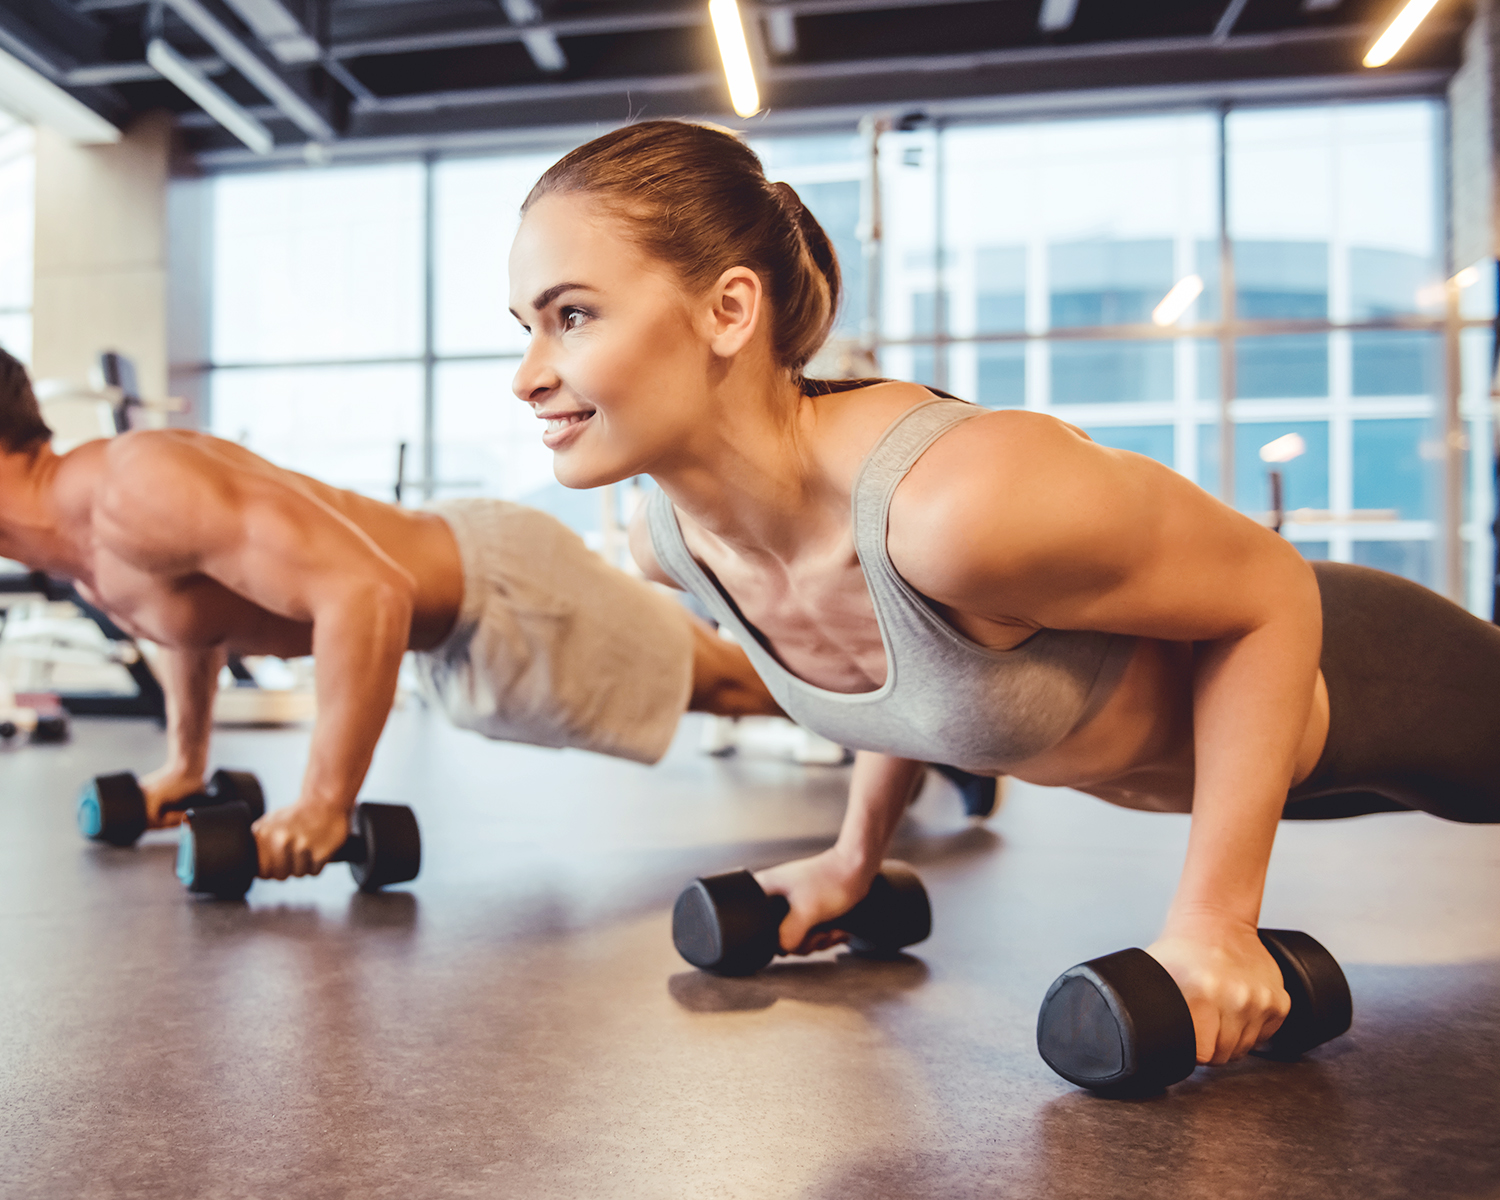 Fit Woman Doing Dumbbell Pushups with Boyfriend at Gym